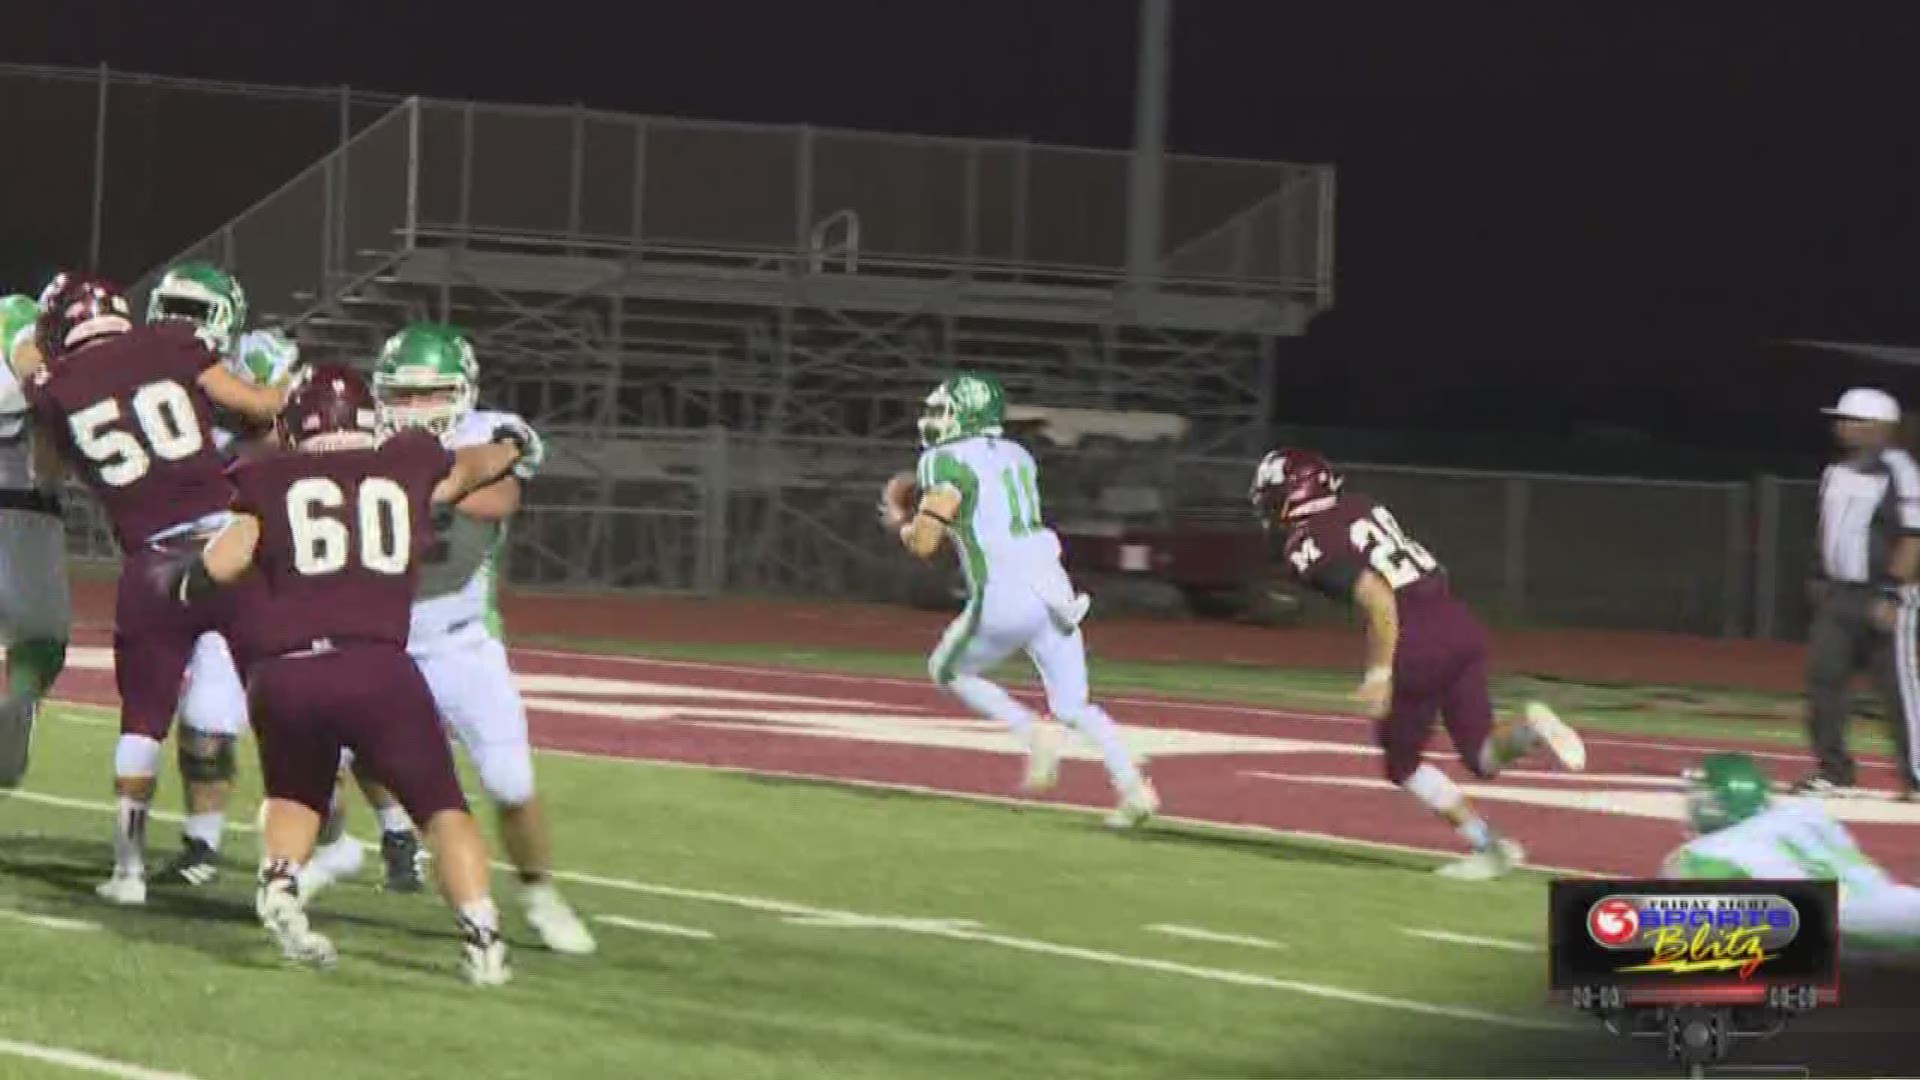 Friday Night Sports Blitz - Week 6: Part IV includes our Week 5 Play of the Week from Falfurrias' Brad Aynsley finds Mikeyu Ramirez. Plus, a look to next week.